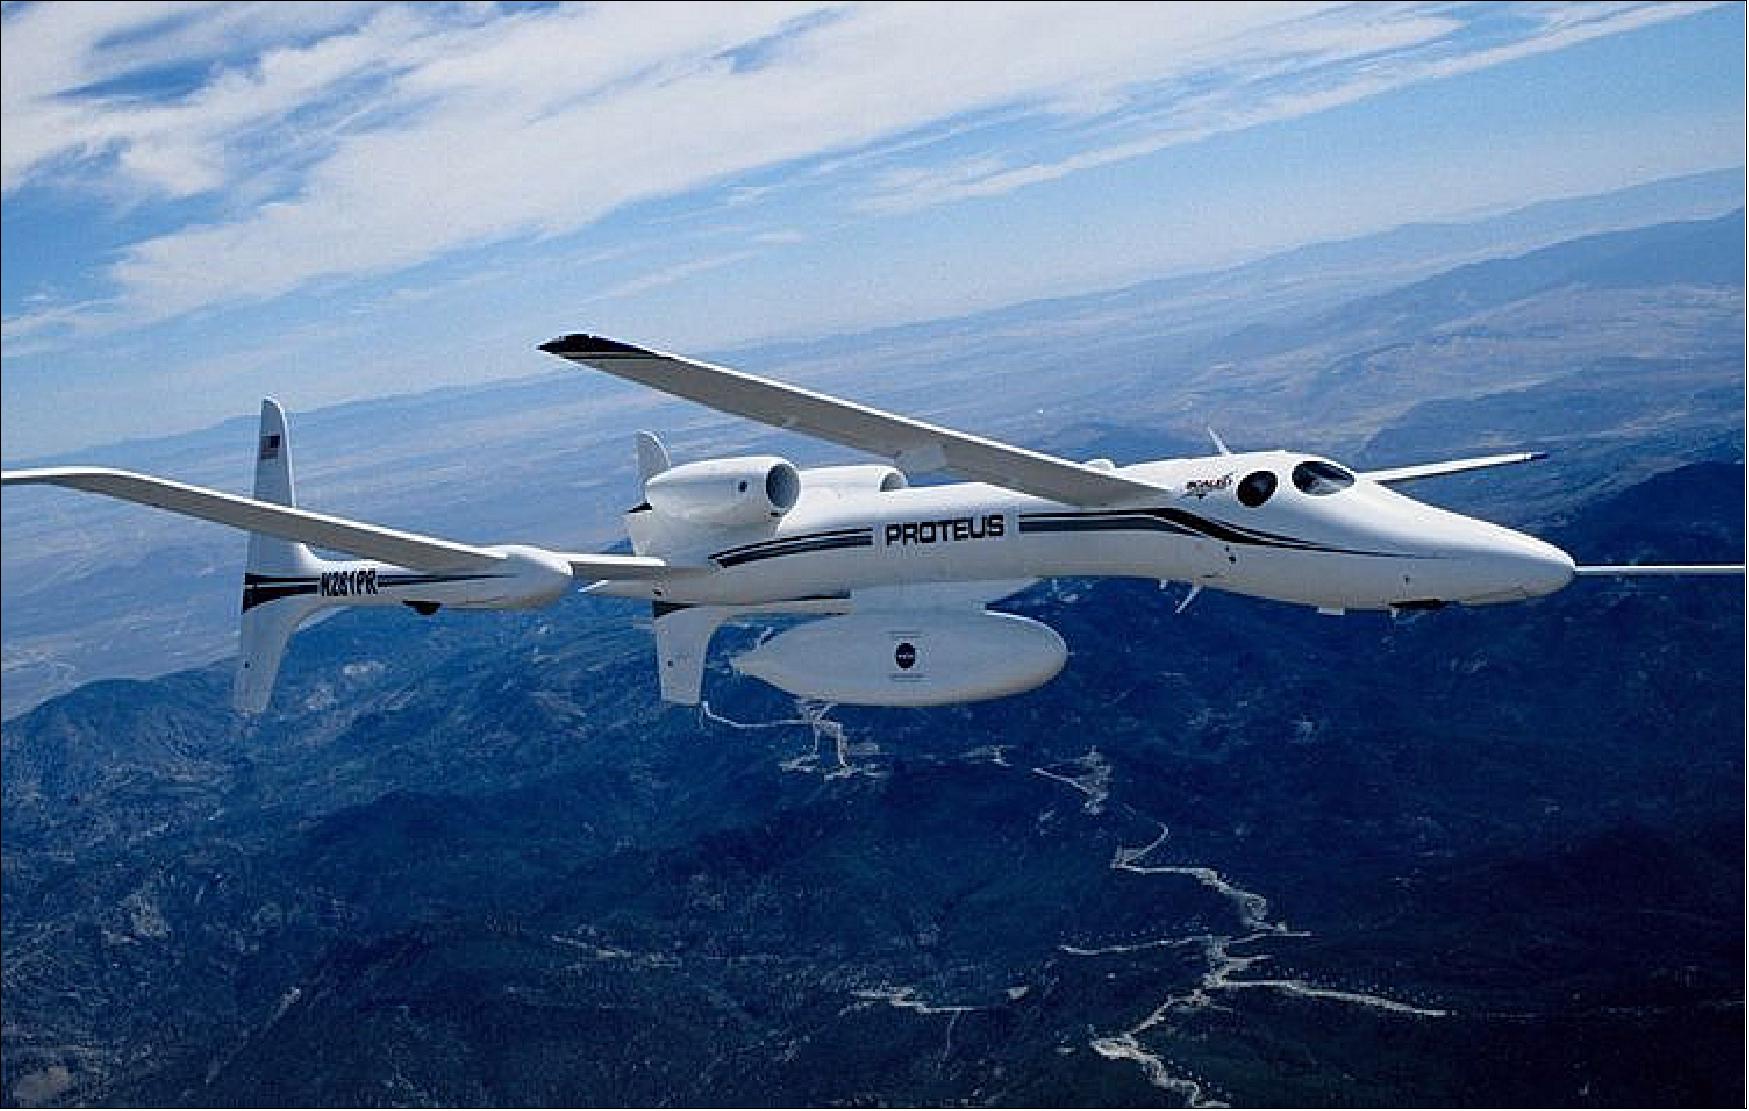 Figure 87: The 100G hardware will be flown aboard the Proteus demonstration aircraft developed by Northrop Grumman subsidiary Scaled Composites (image credit: Northrop Grumman)